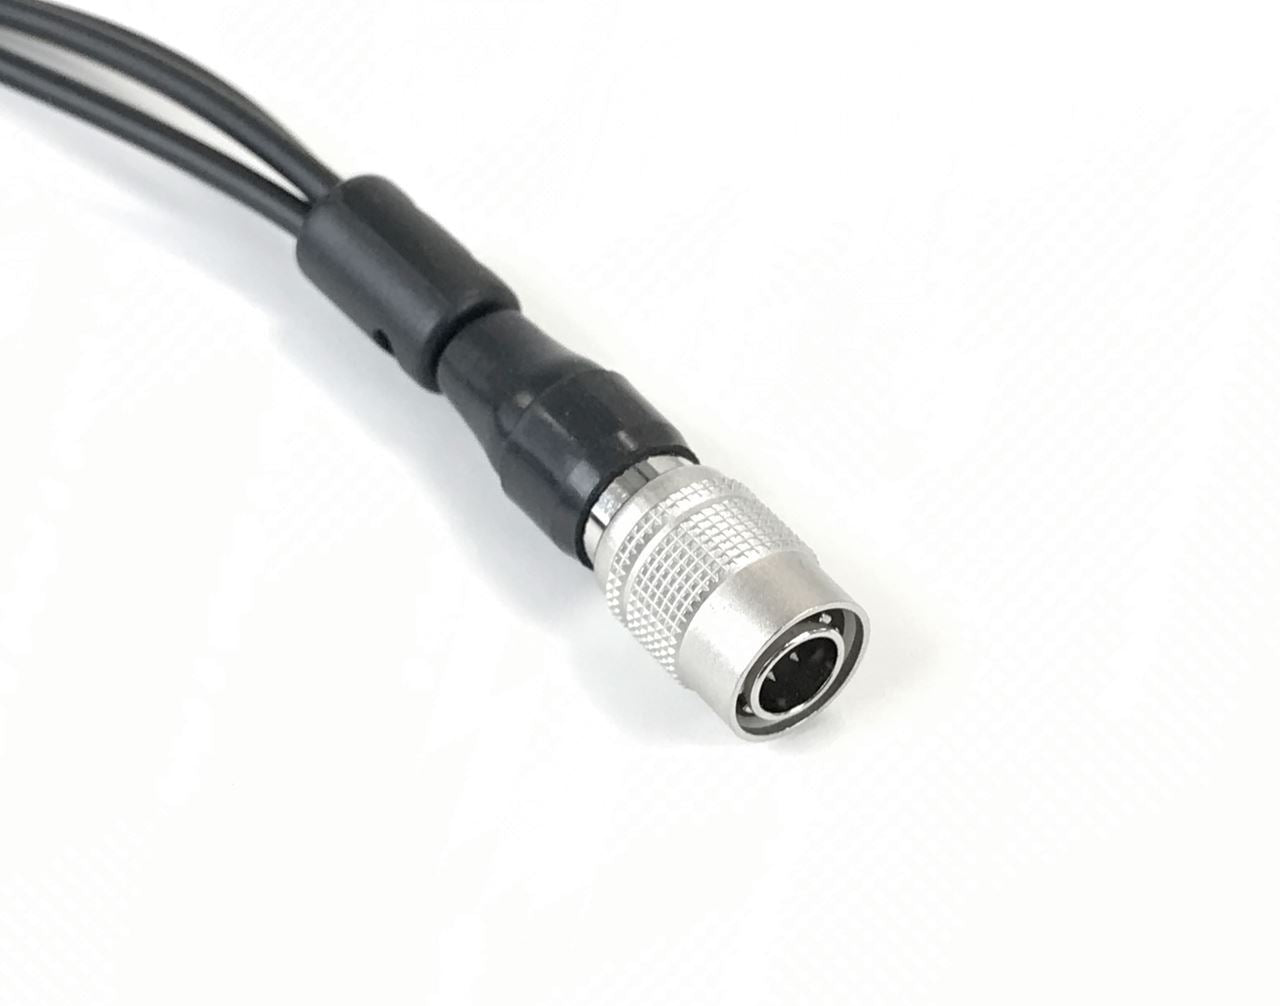 Comparable KHS-12 3 wire mini lapel mic with earphone for use with the Kenwood NX-5220 Portable Radio - Waveband Communications